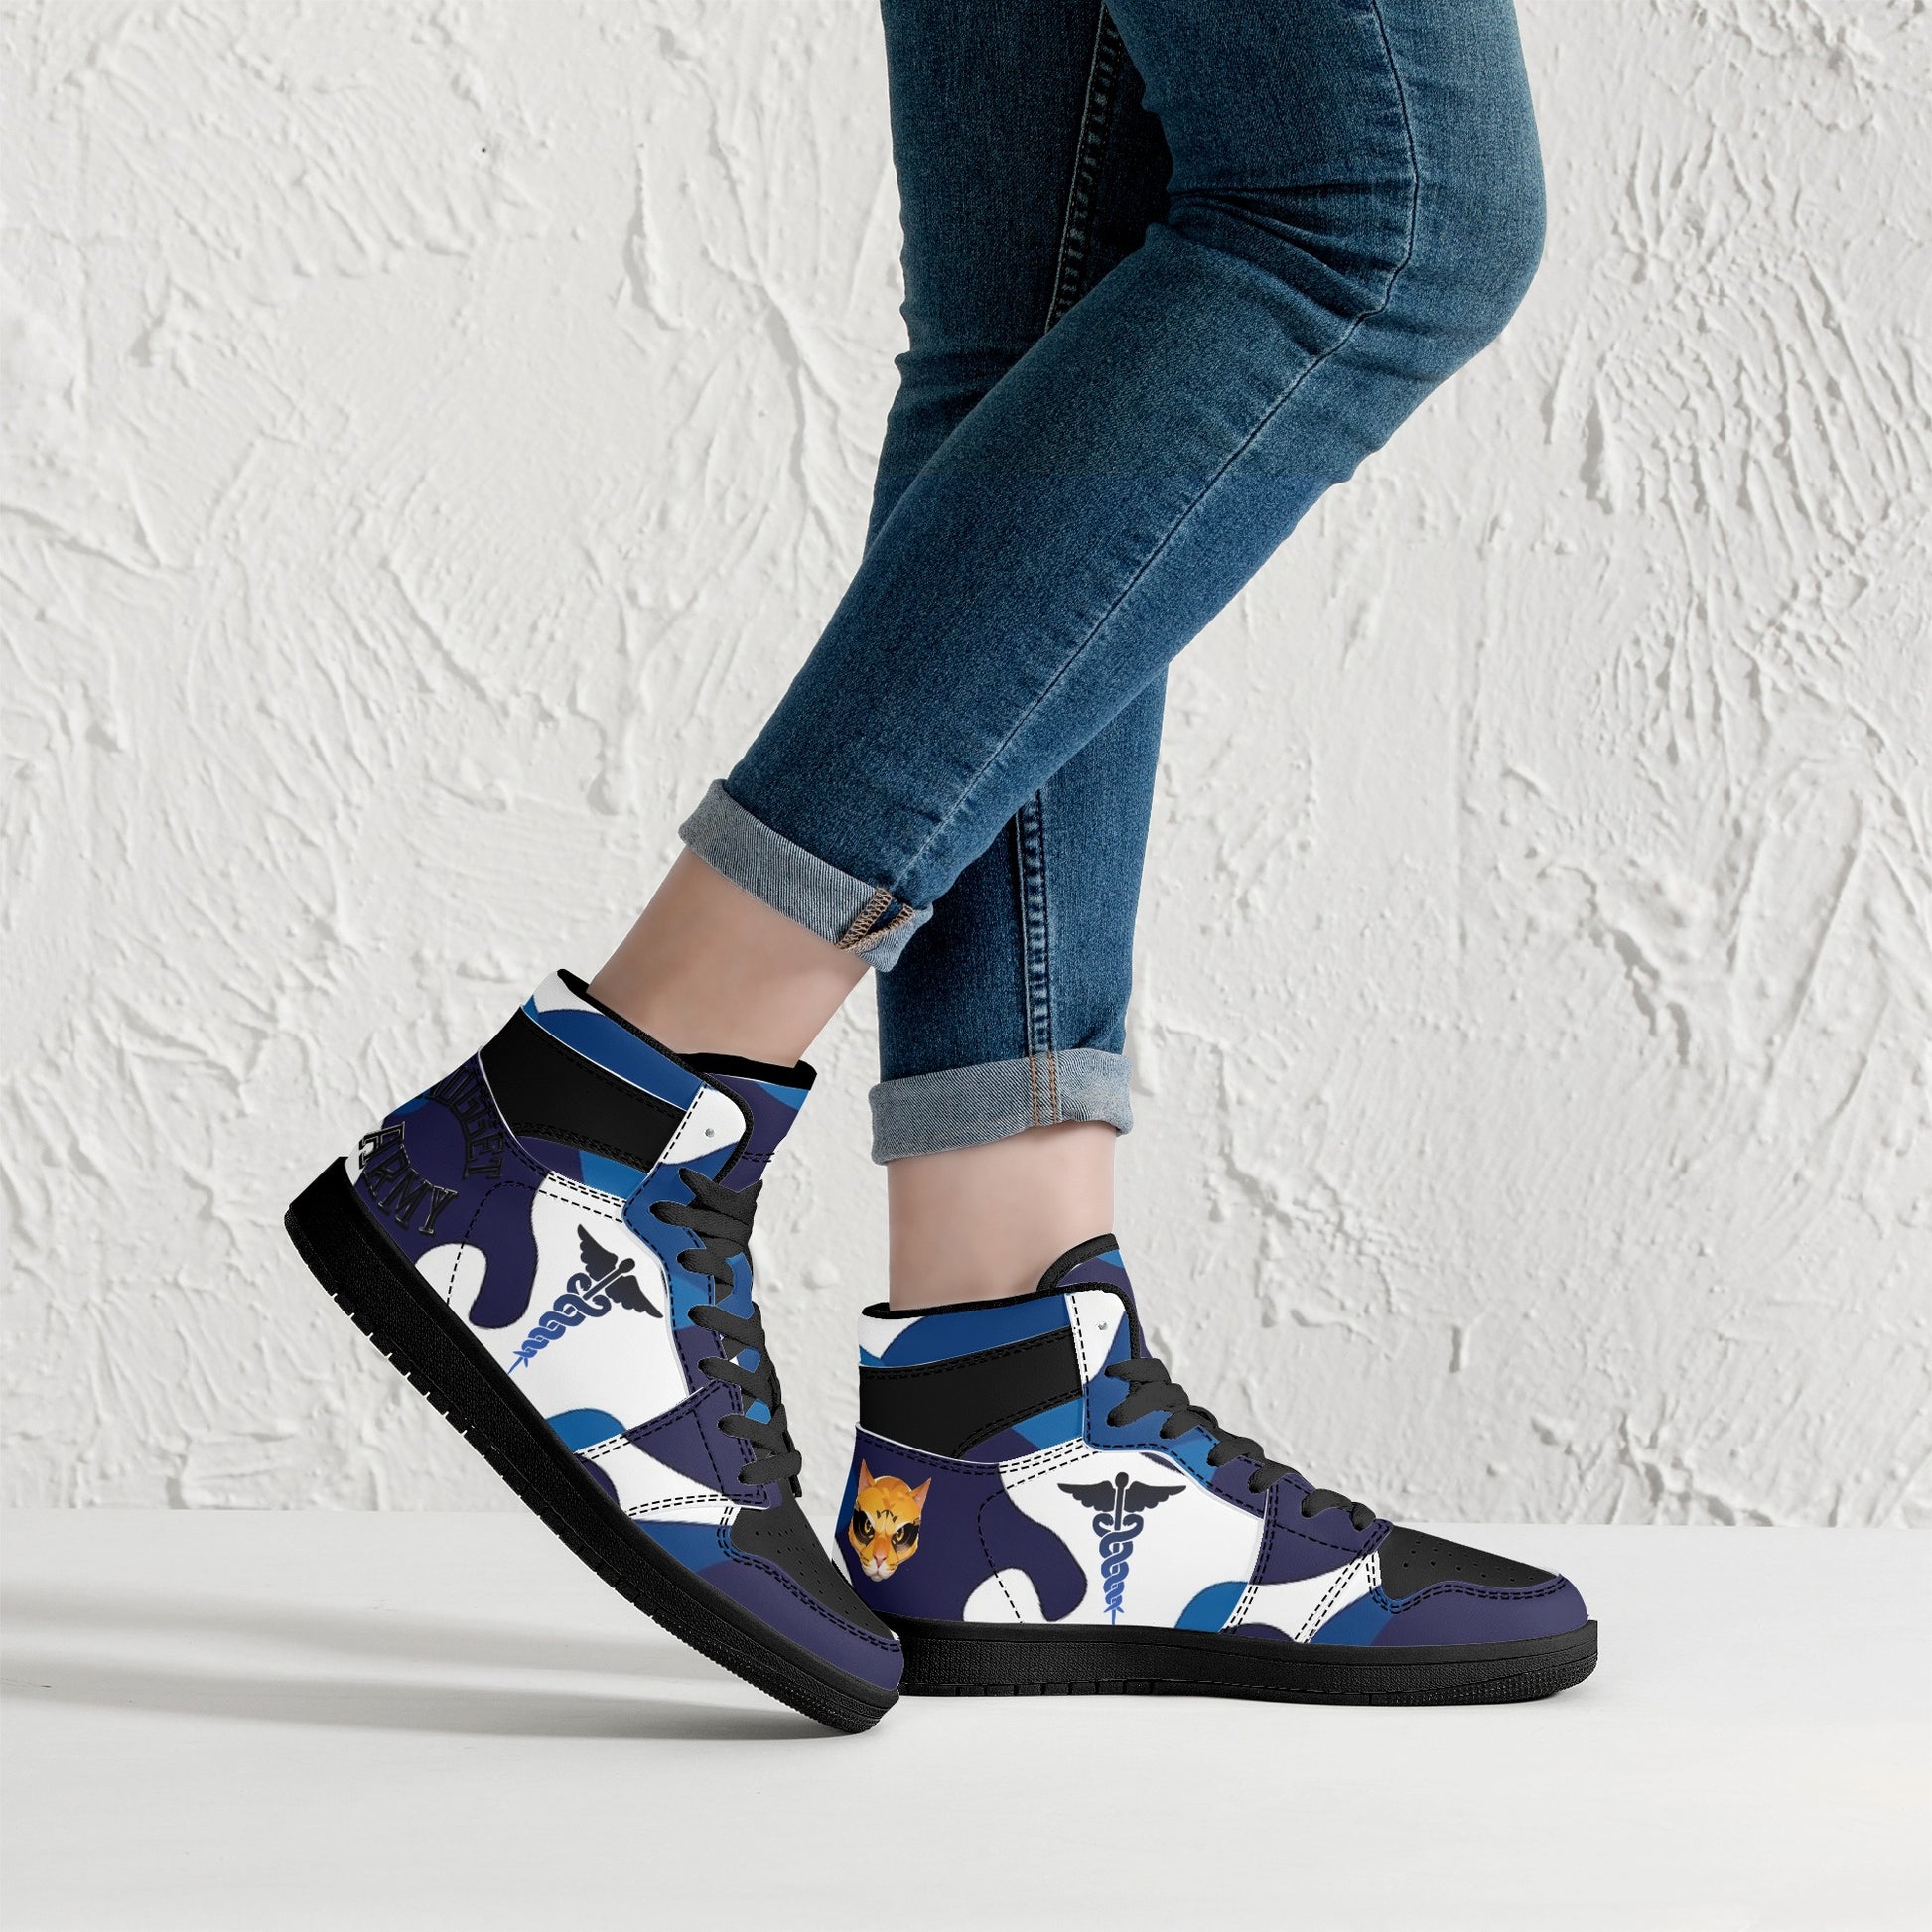 Stand out  with the  Nugget Army Medical Womens Black High Top Leather Sneakers  available at Hey Nugget. Grab yours today!